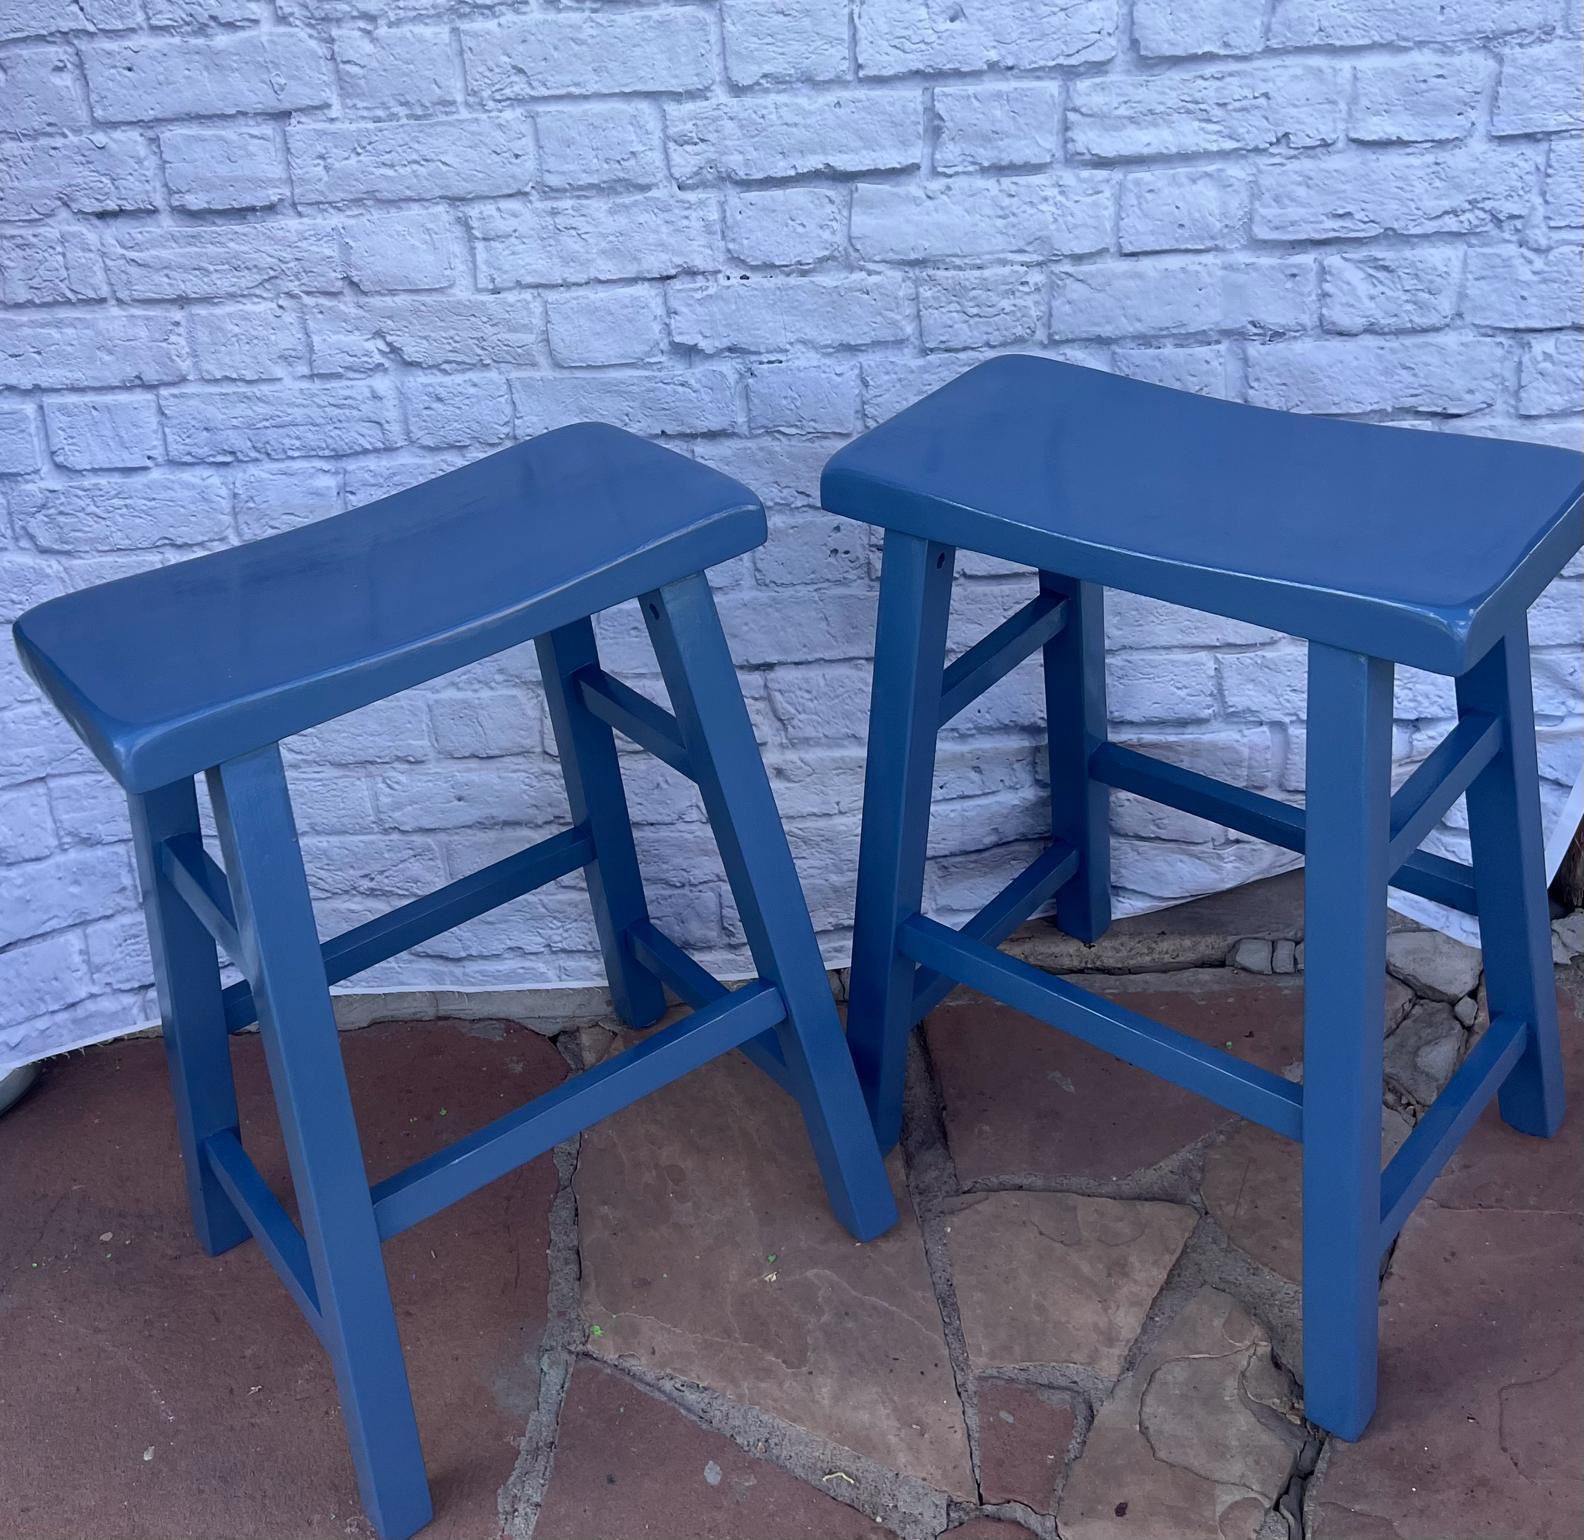 2 new blue wooden bar stool 23.5 in tall home decor furniture kitchen island cottage ecletic